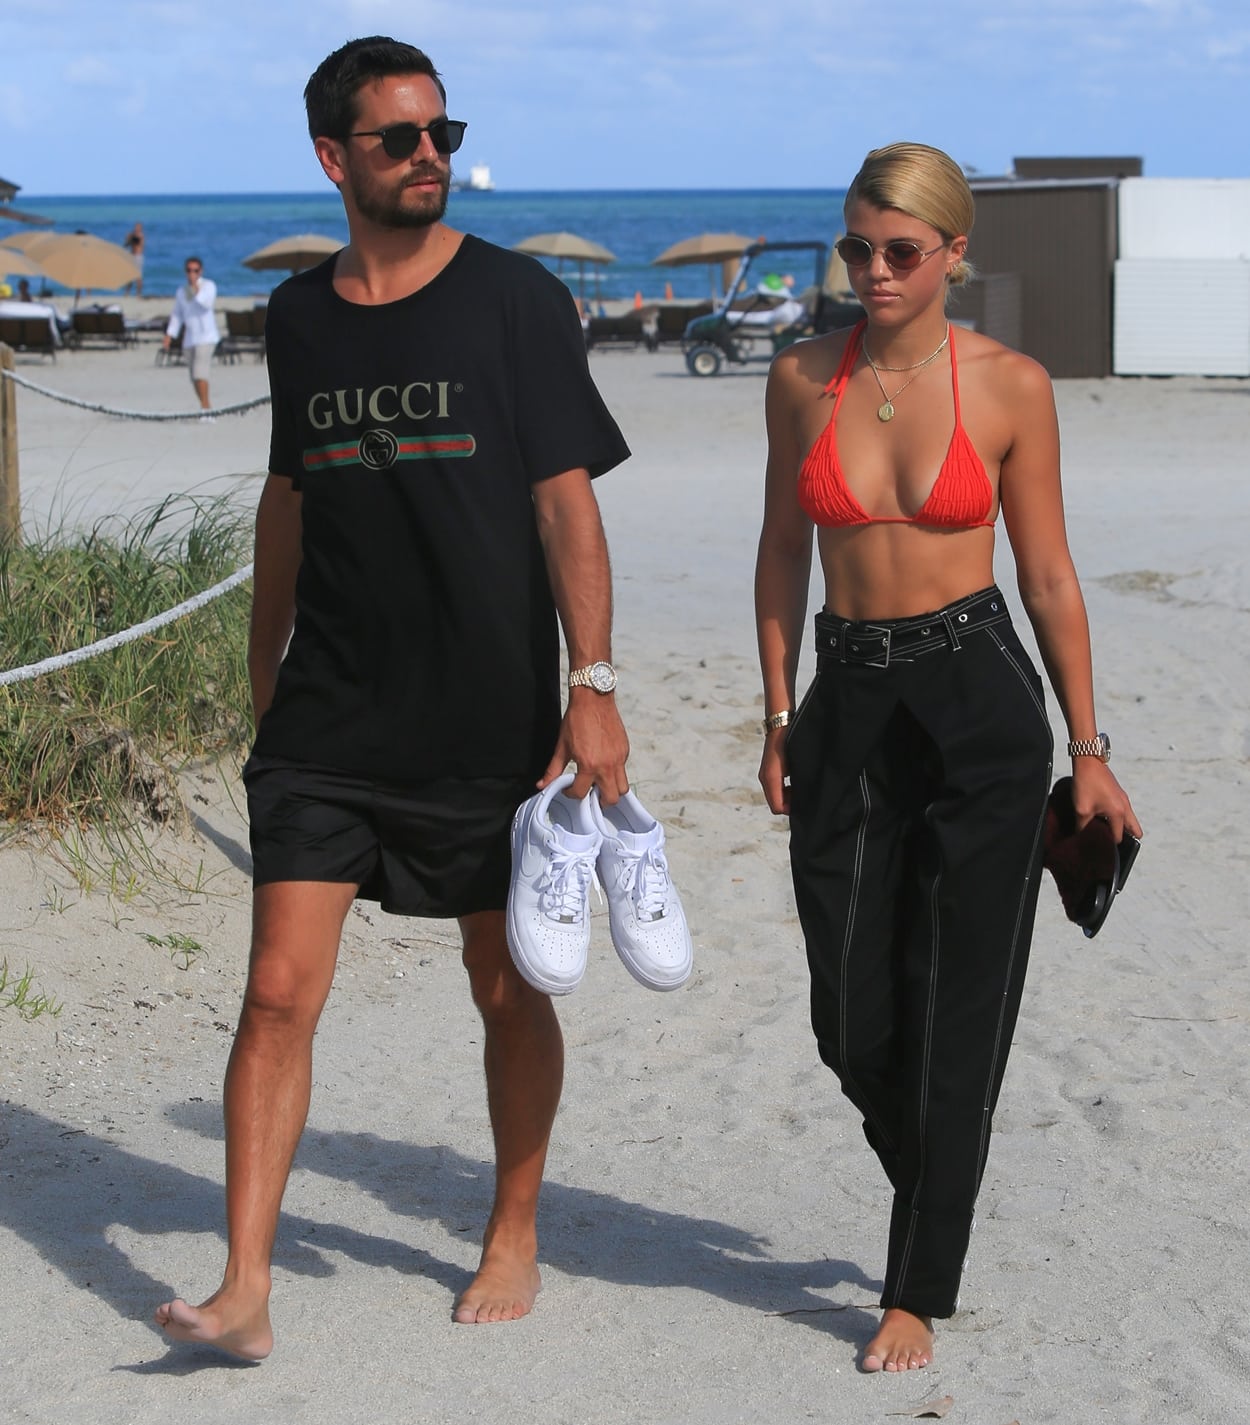 Scott Disick dated 16-year-younger Sofia Richie from 2017 to 2020